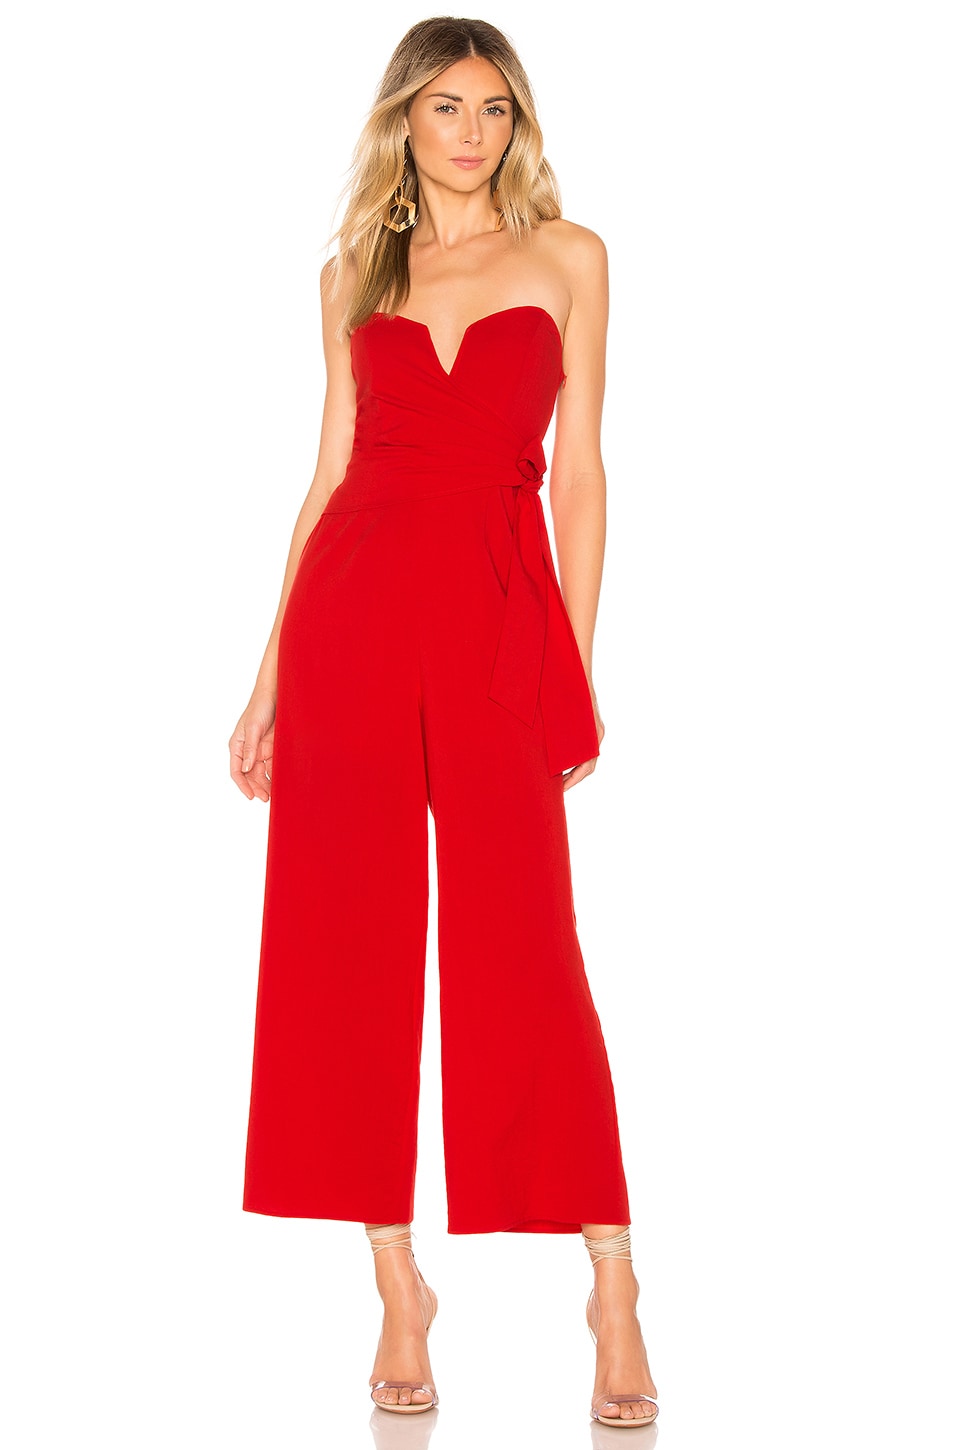 ASTR ASTR THE LABEL ZION JUMPSUIT IN RED.,ASTR-WC9